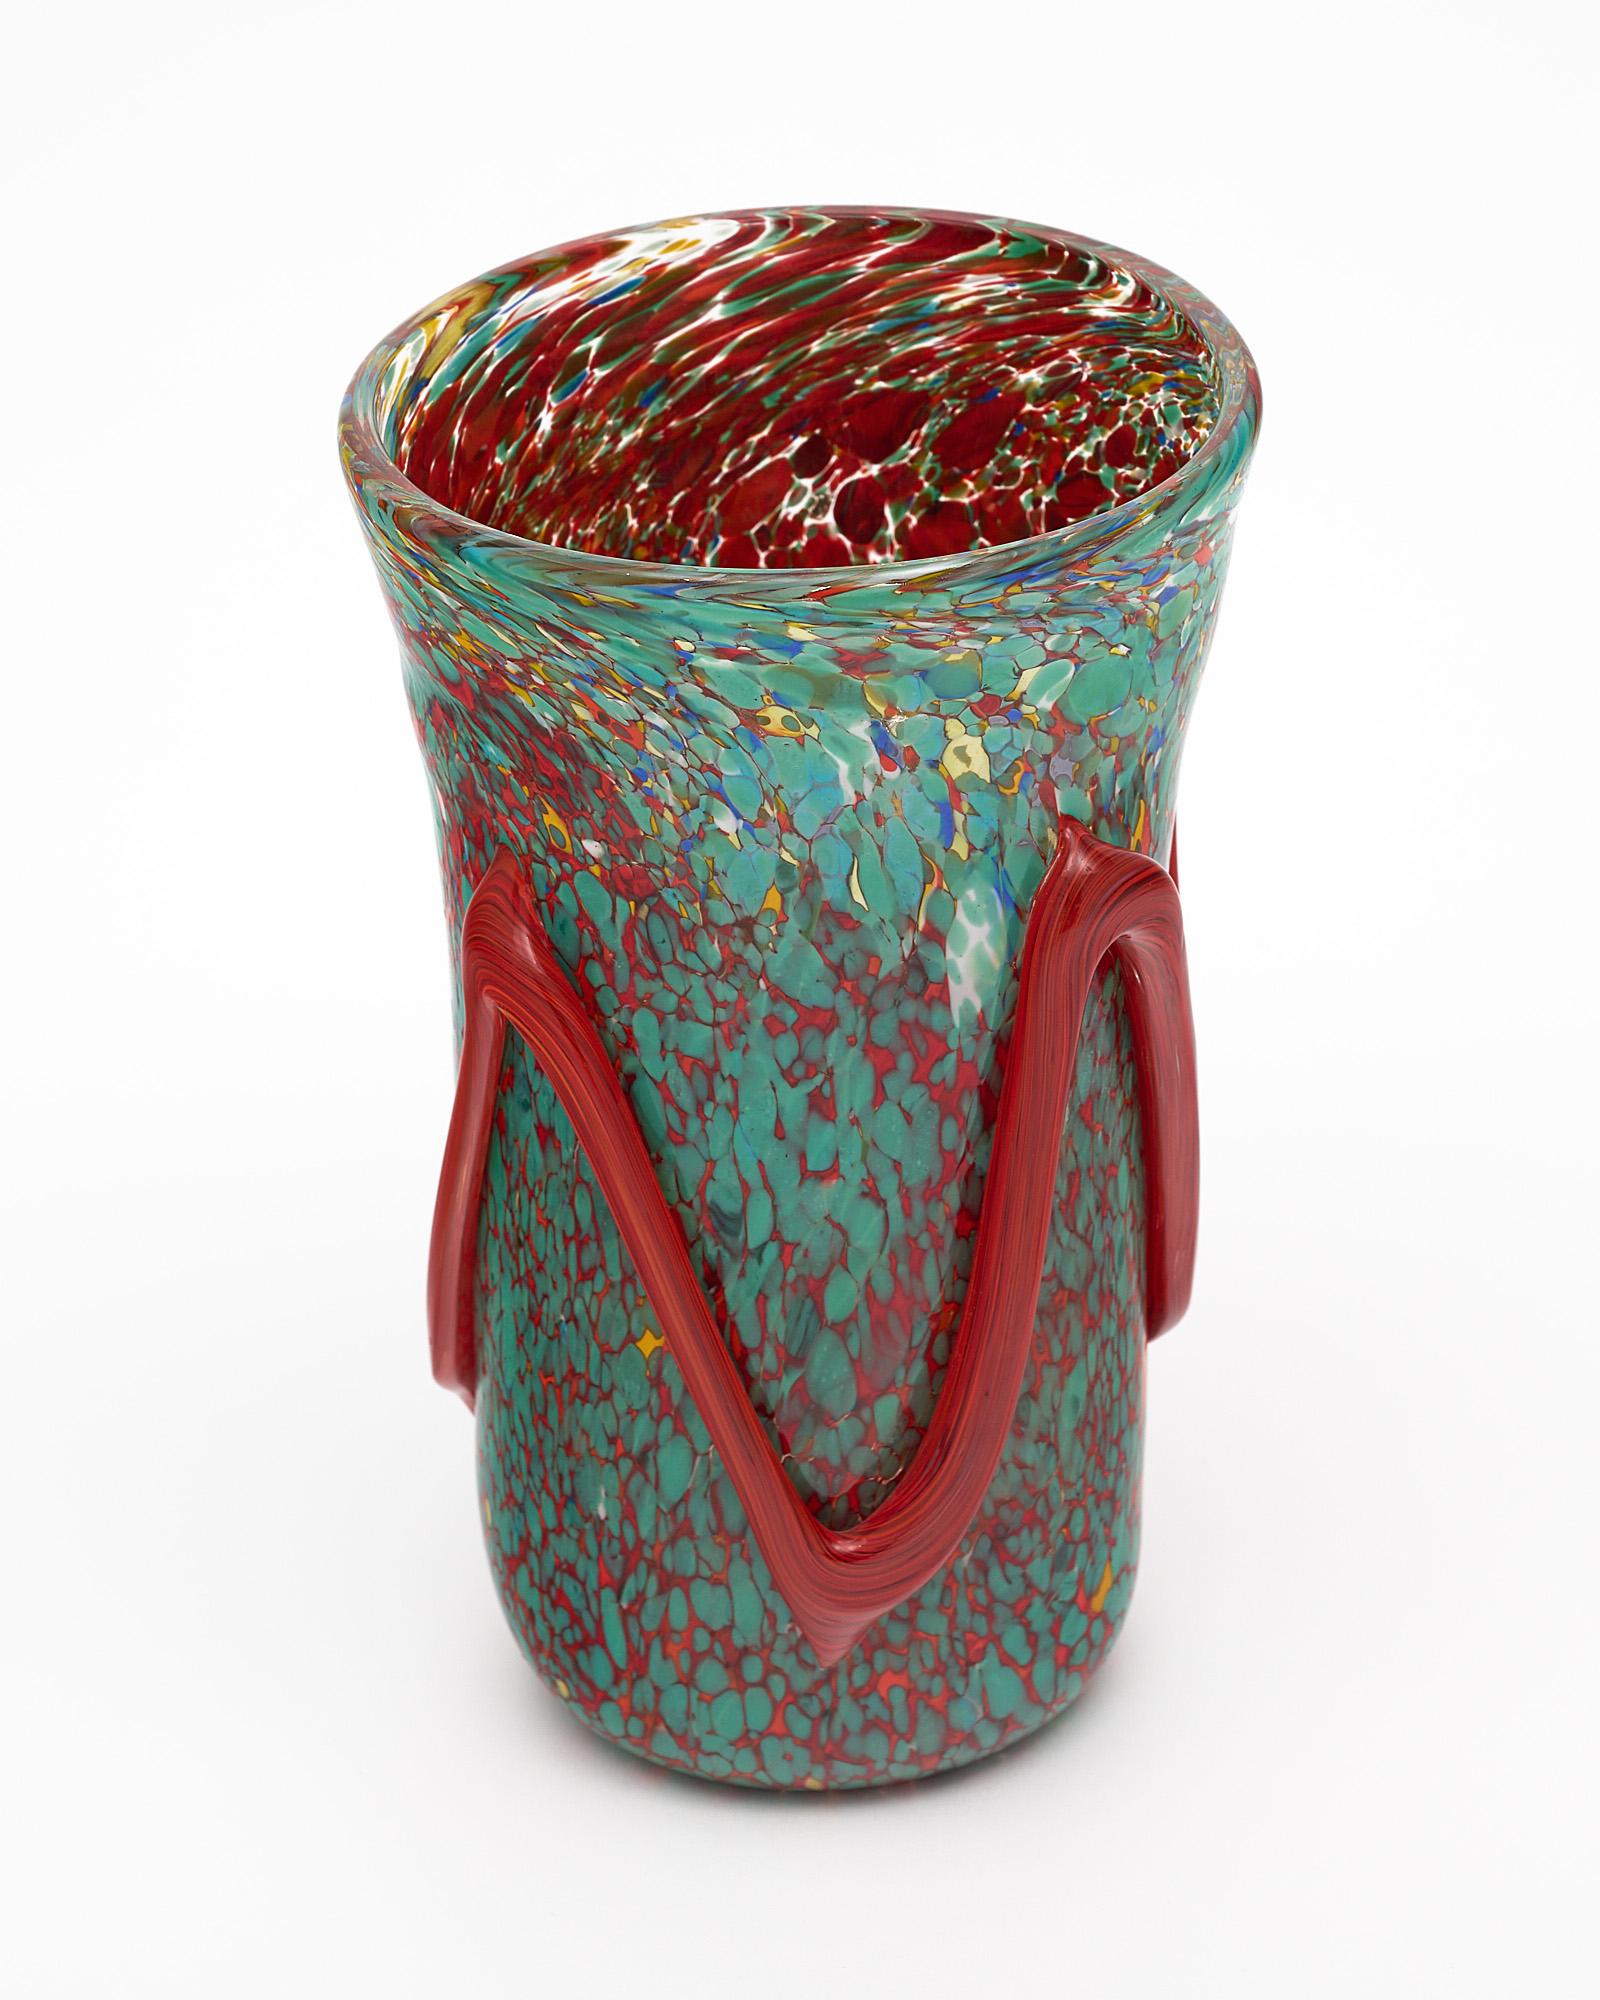 Murano glass vase from Murano, Italy. This piece is hand-blown glass with striking colors and technique. We love the organic movement of the pattern and details.